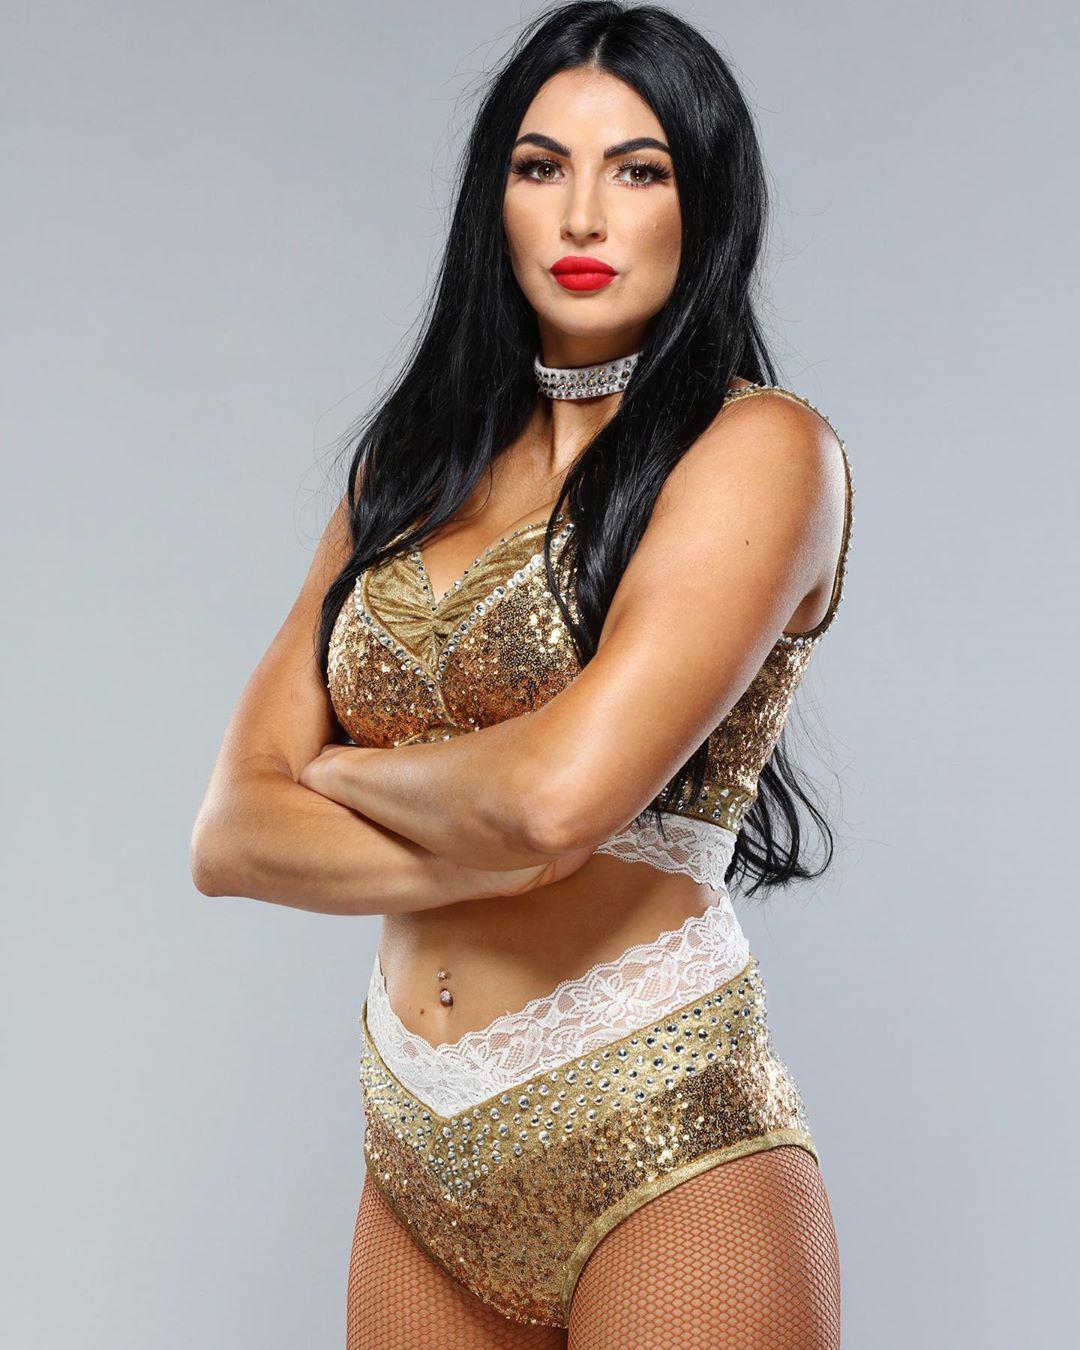 60+ Hot Pictures Of Billie Kay Will Rock The WWE Fan Inside You 243